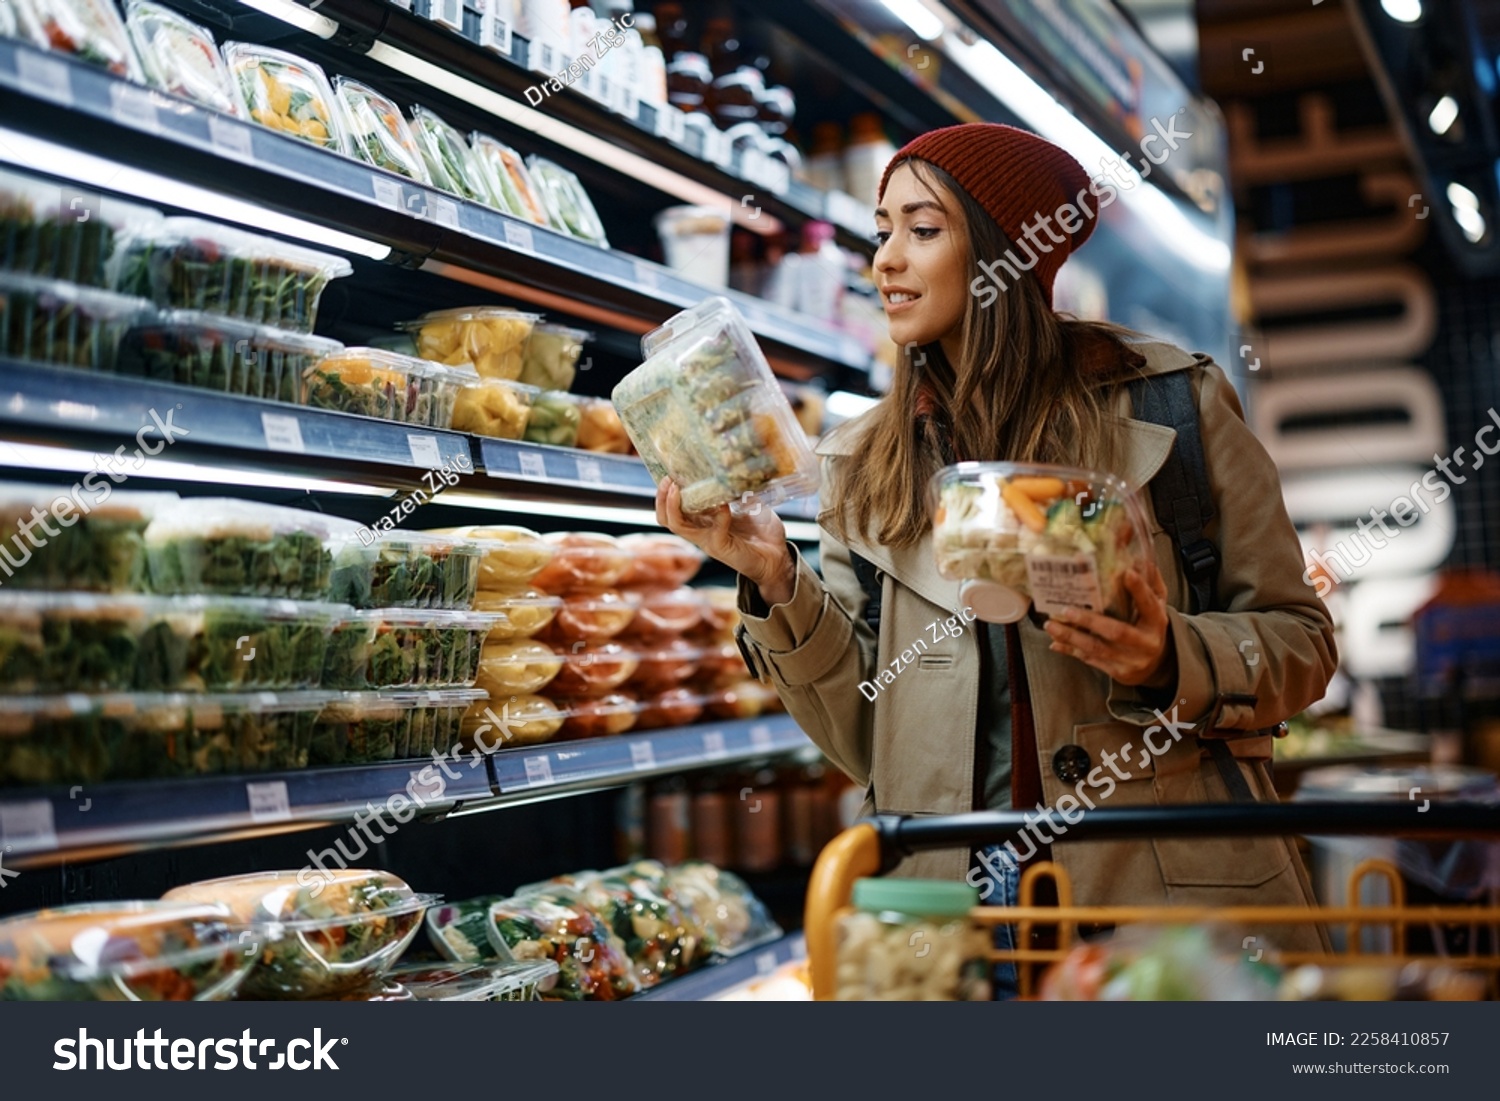 Smiling woman reading label on food package while buying groceries from refrigerated section in supermarket. #2258410857